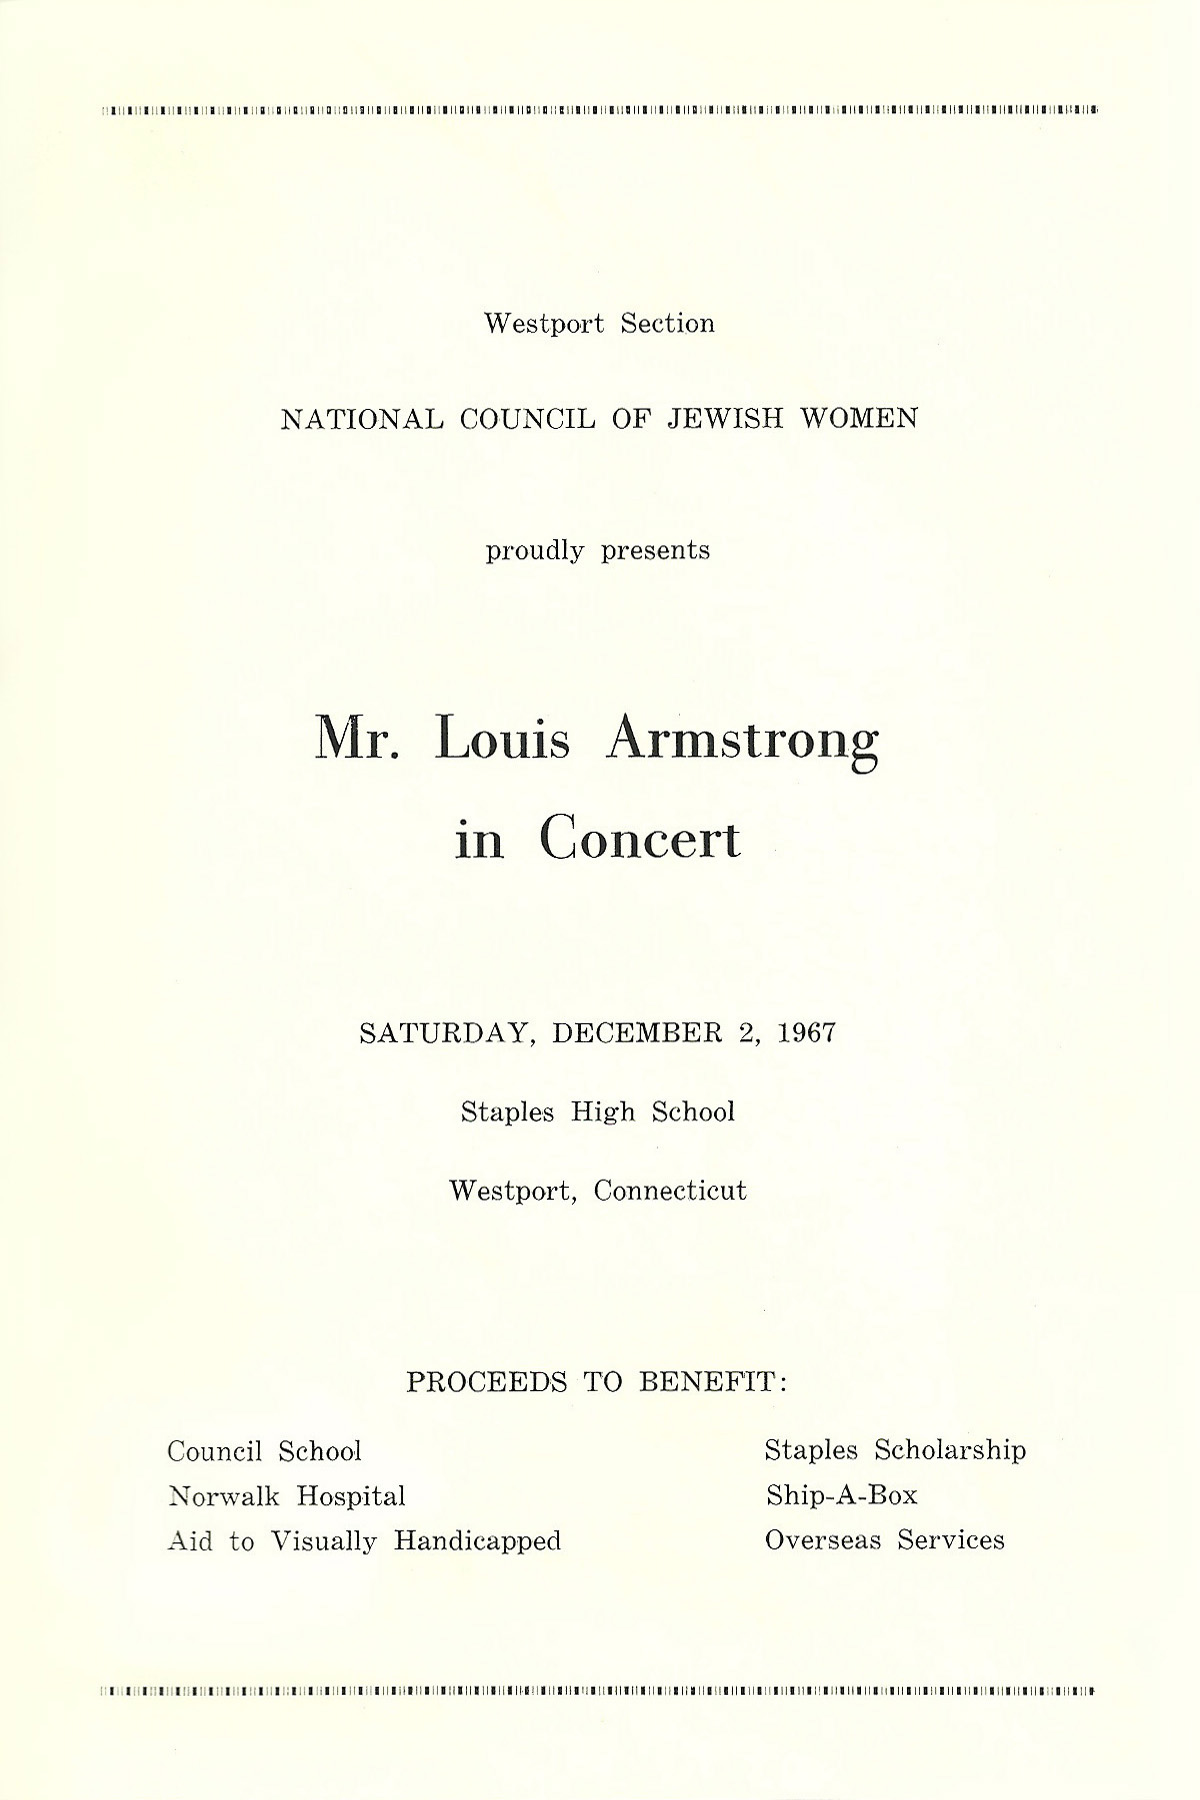 Concert Program For Louis Armstrong, December 2 1967 Page 3